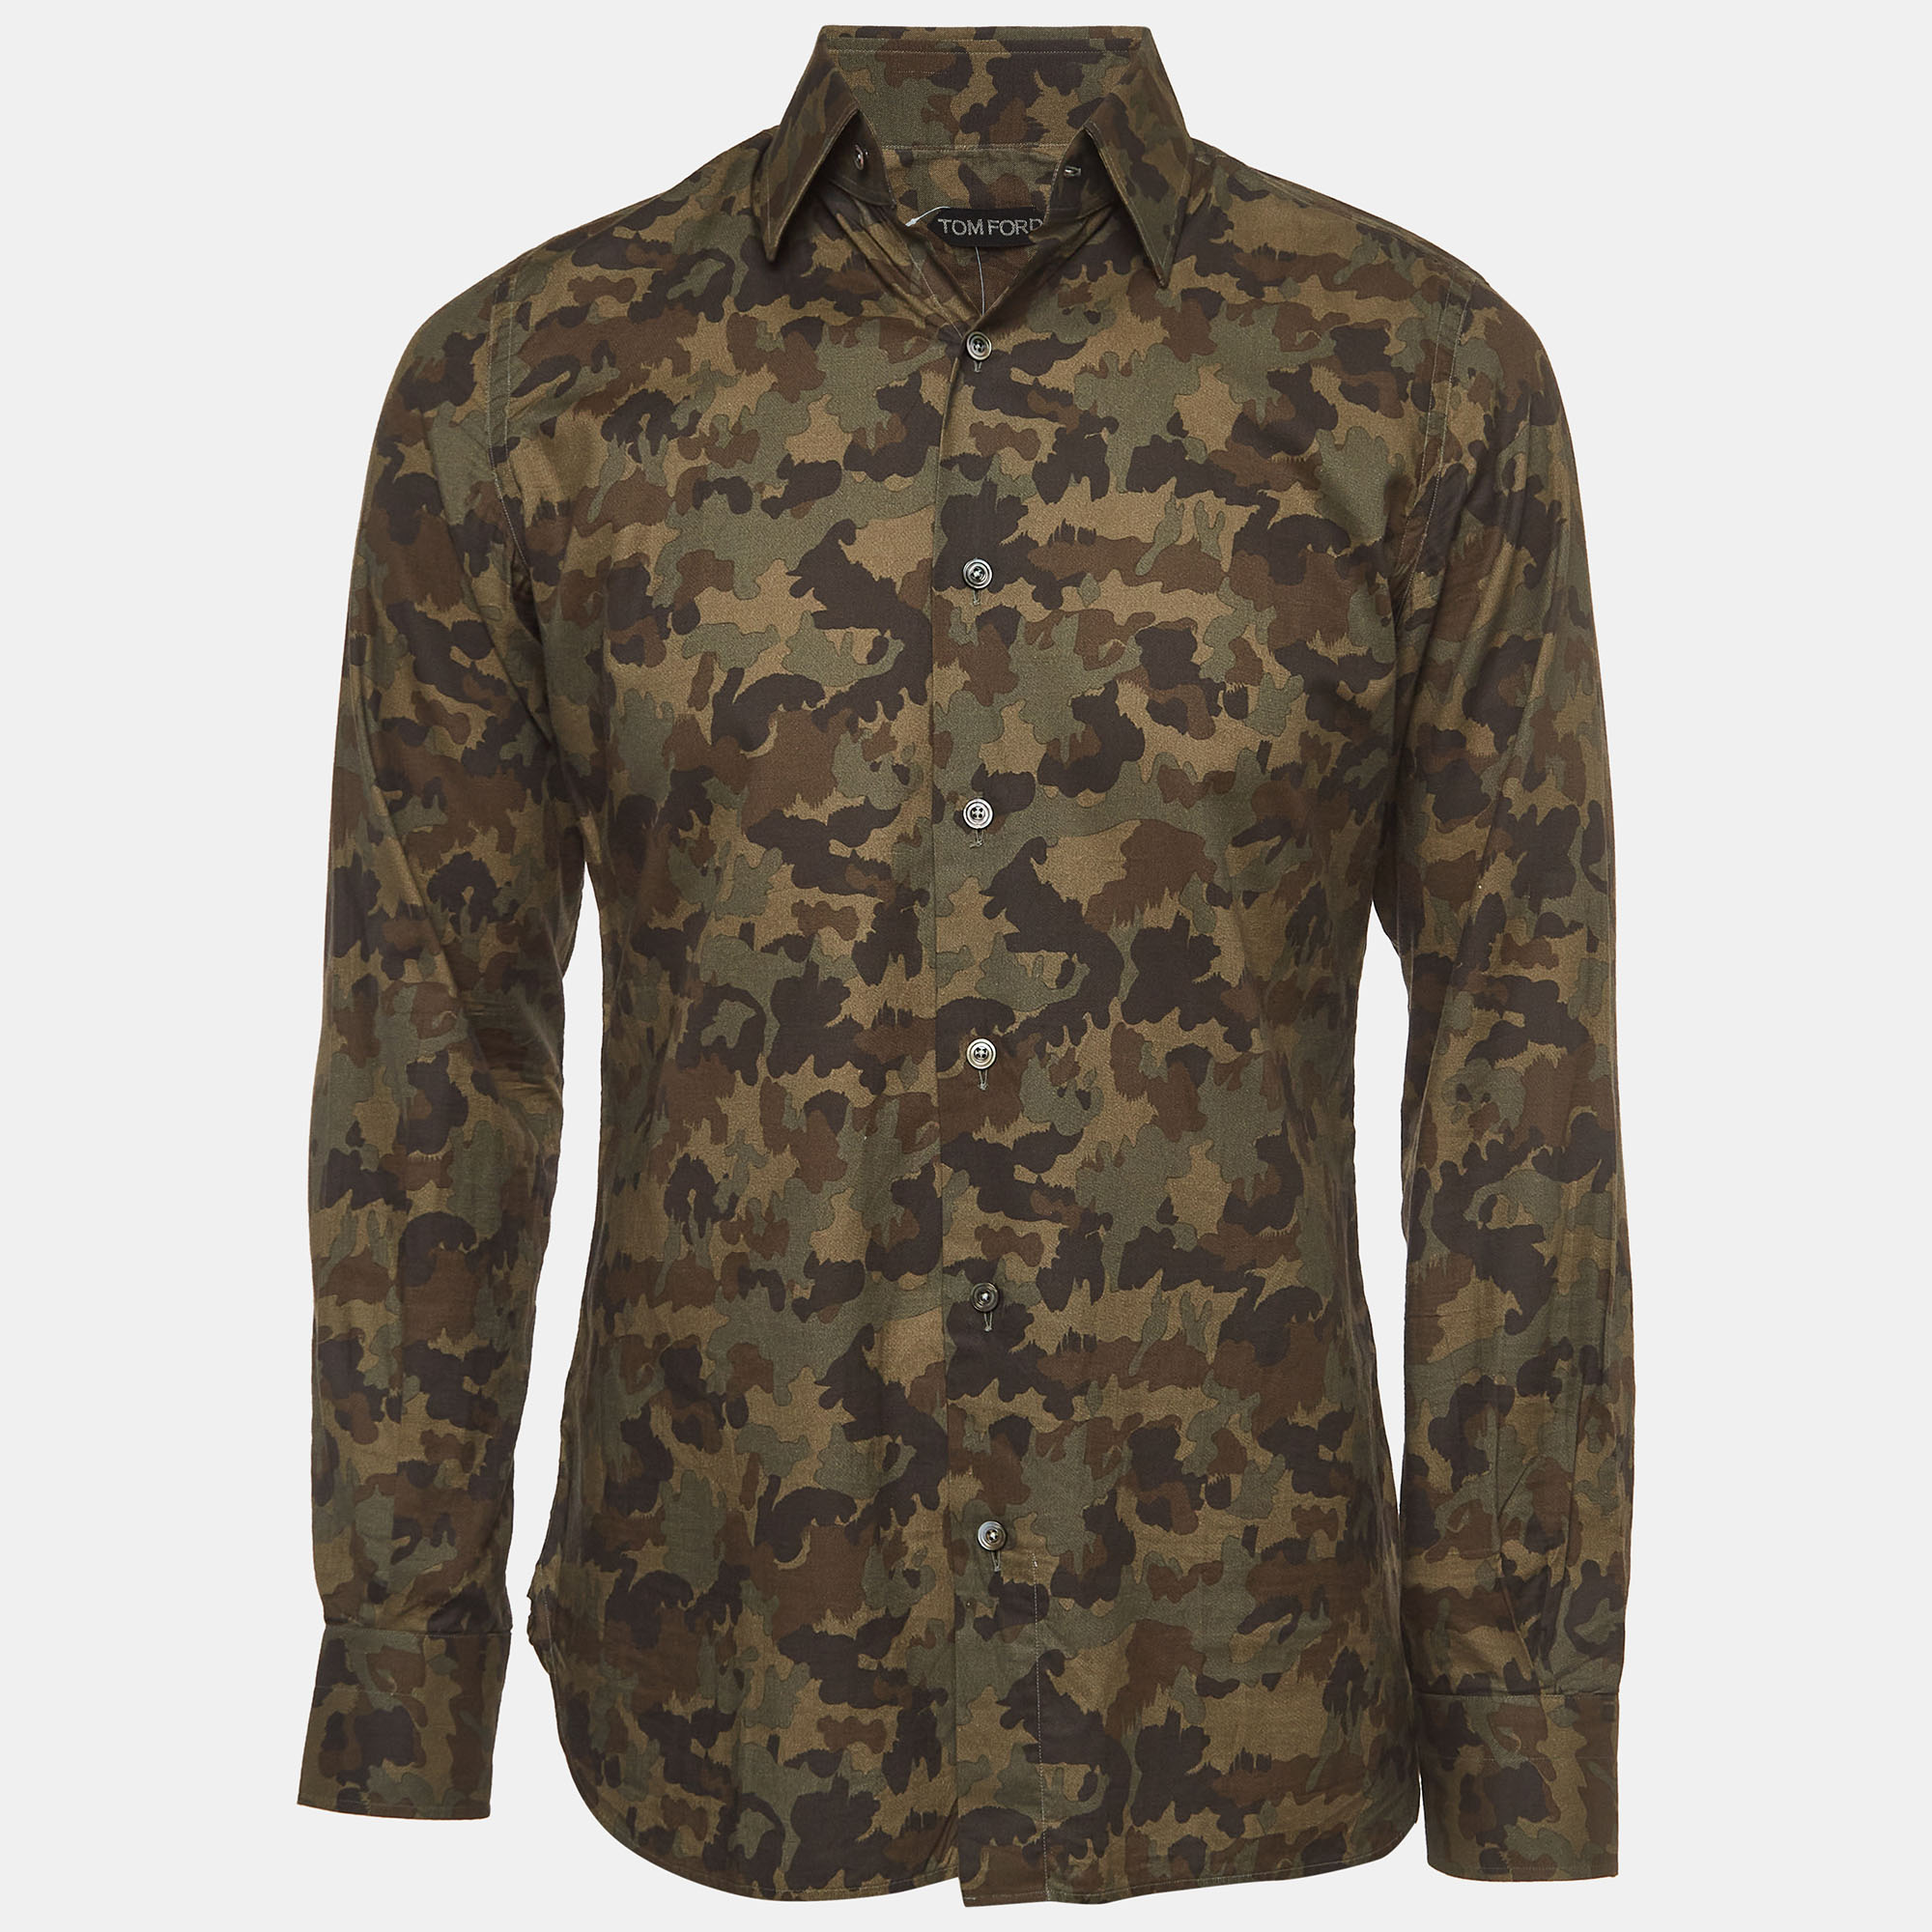 Tom Ford Green Camouflage Print Cotton Long Sleeve Shirt M